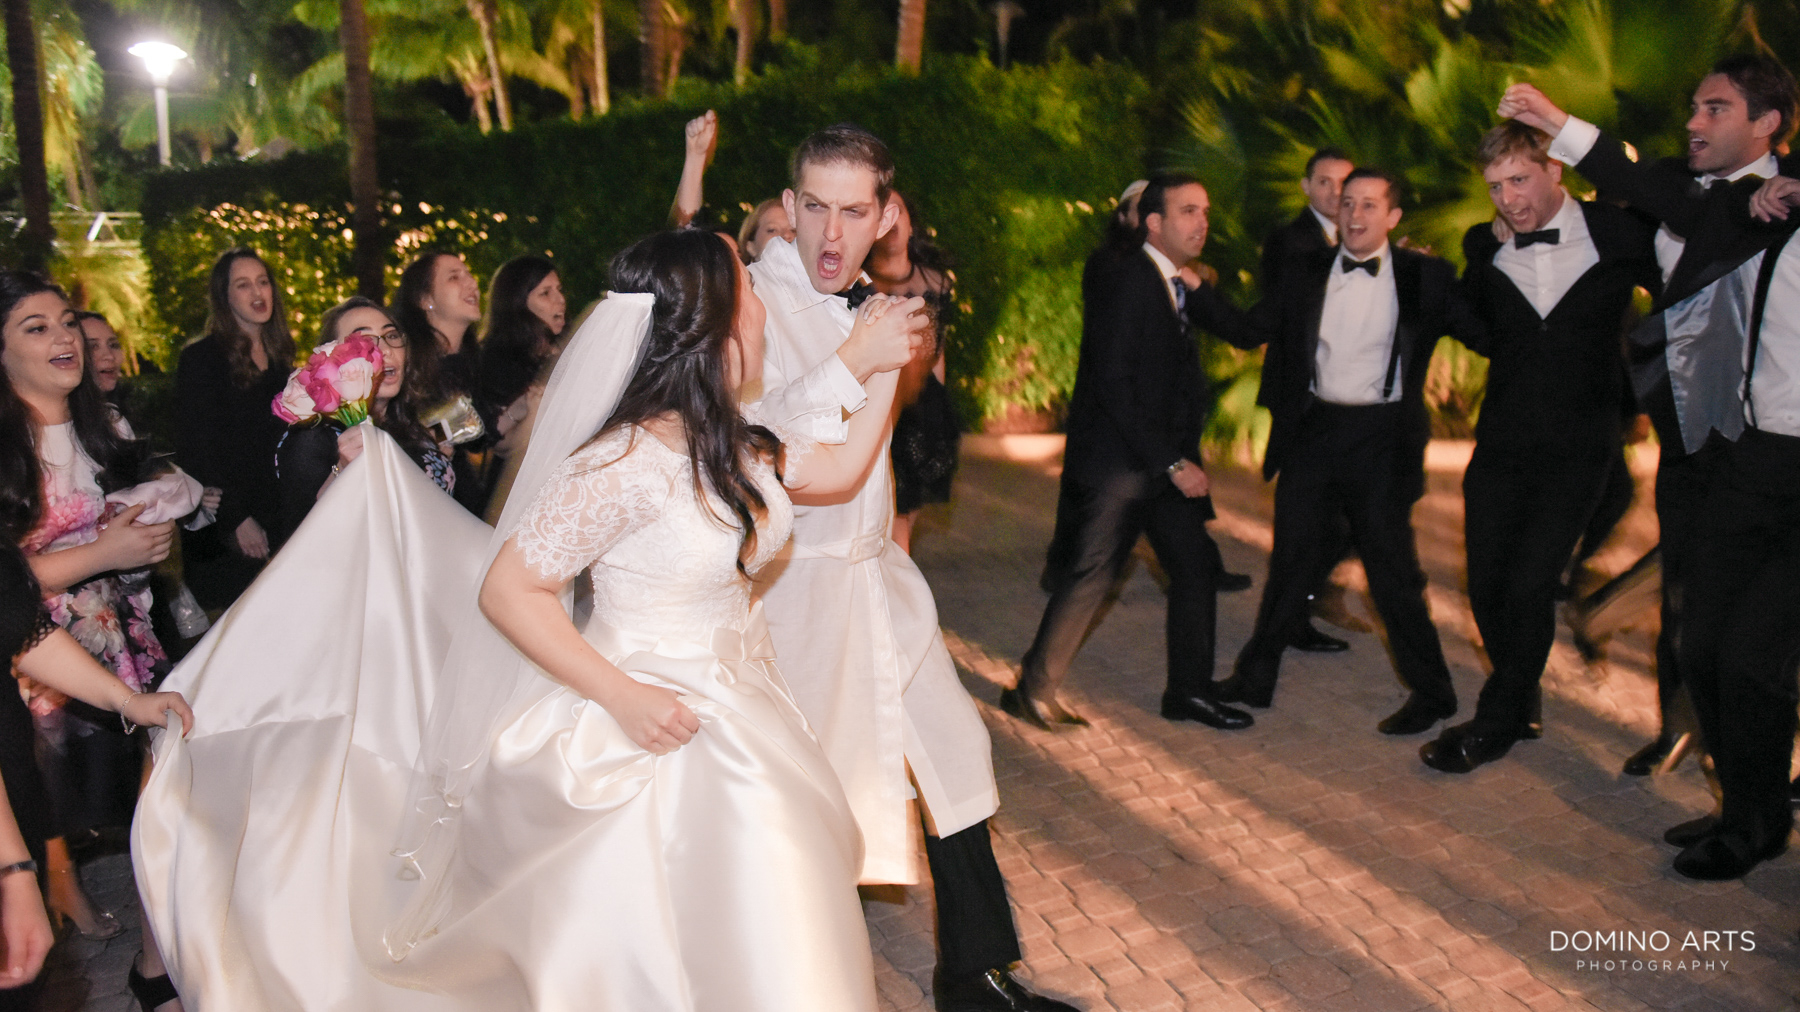 FUN nightime outdoor wedding at Turnberry Isles Miami Country Club